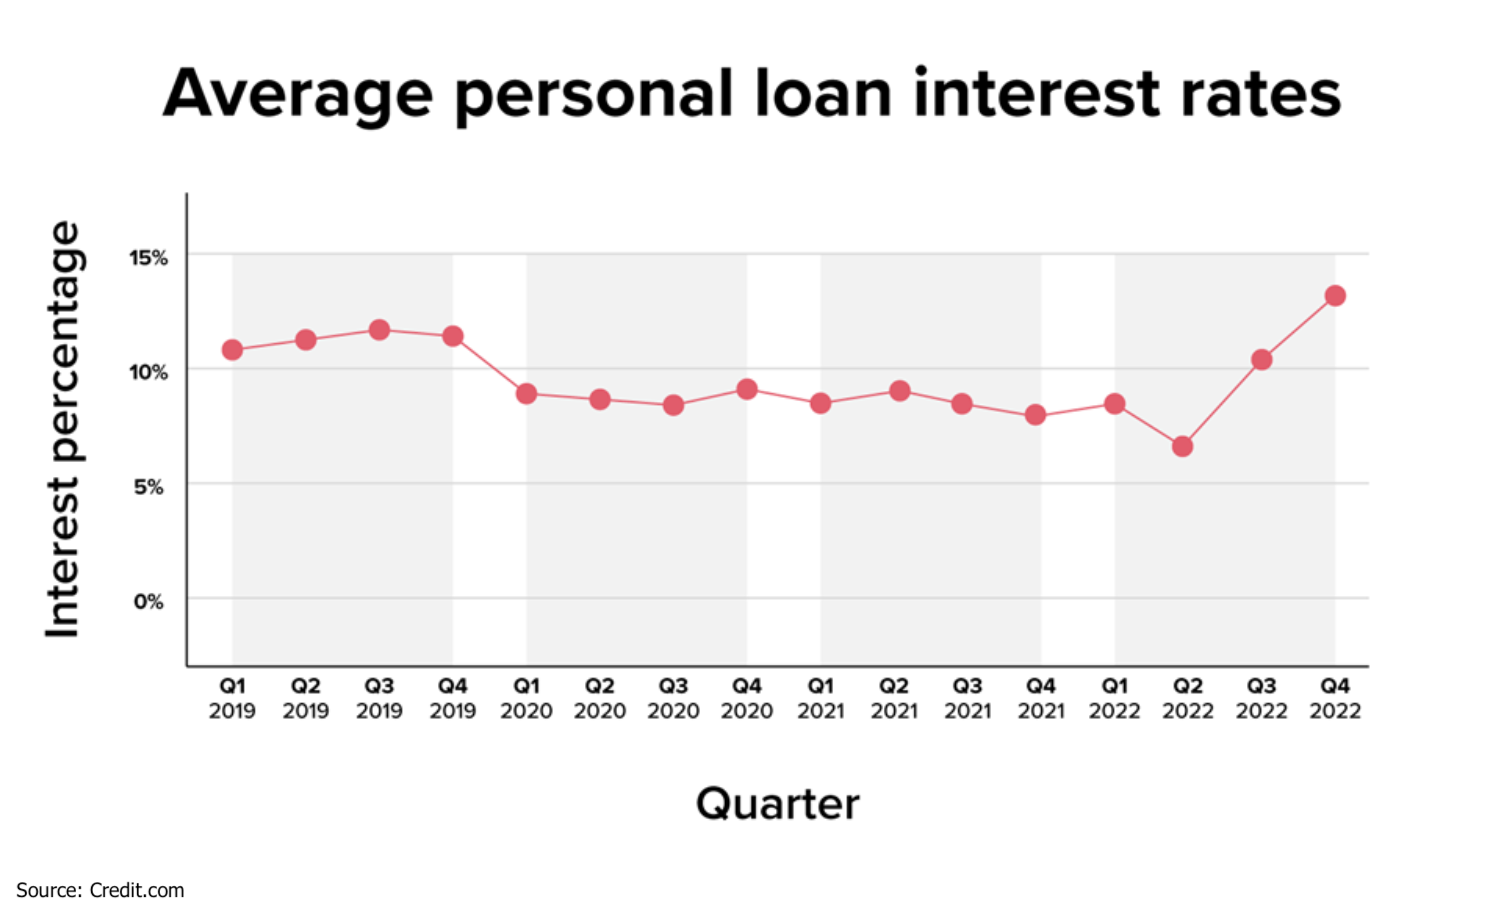 Graph showing average loan interest rates over time.